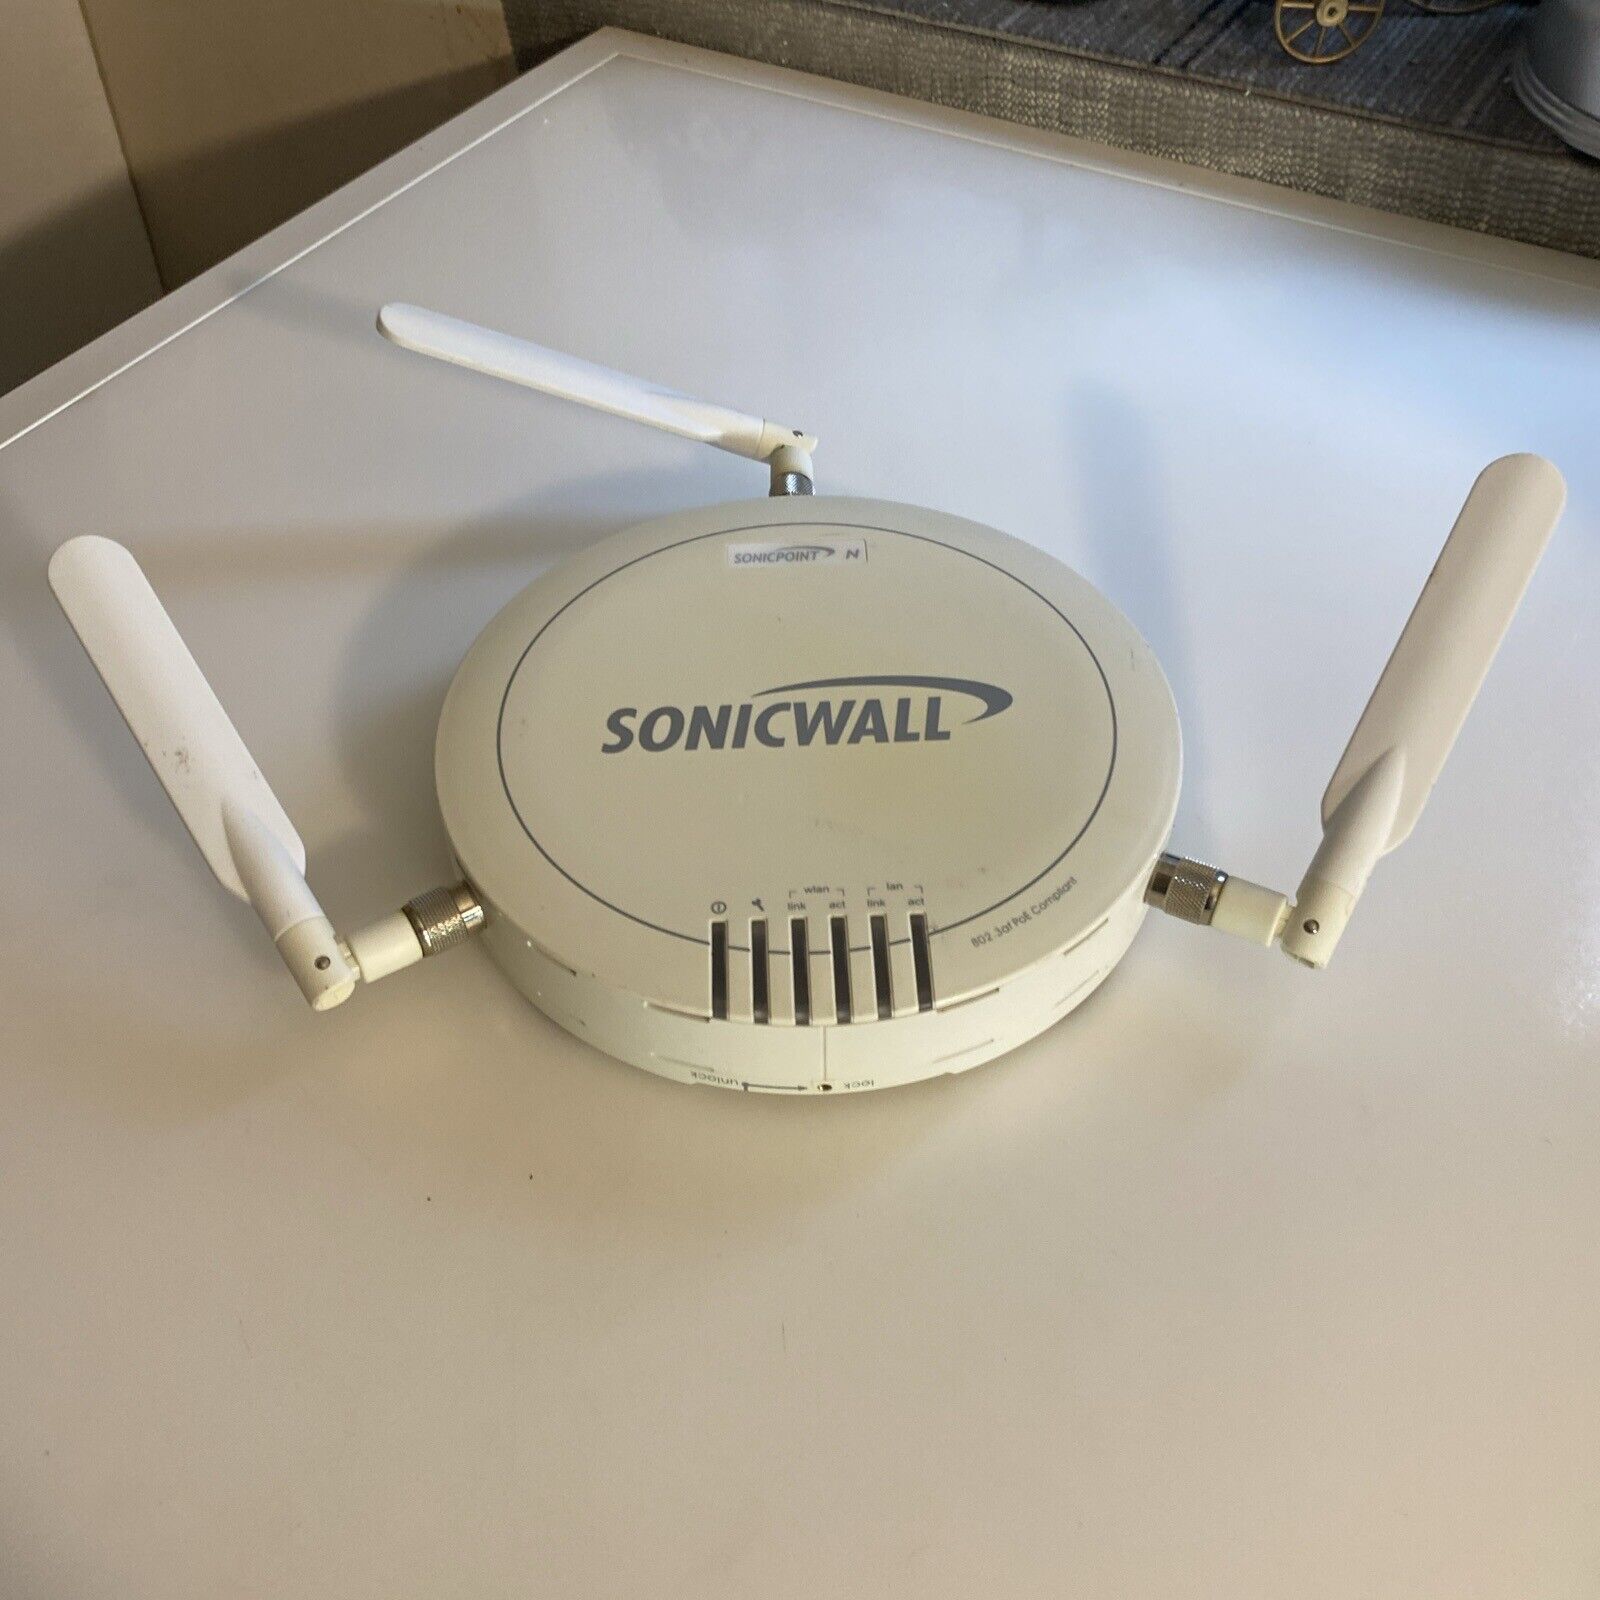 SonicWALL APL21-069 Dual Band SonicPoint N Wireless Access Untested lfd 2